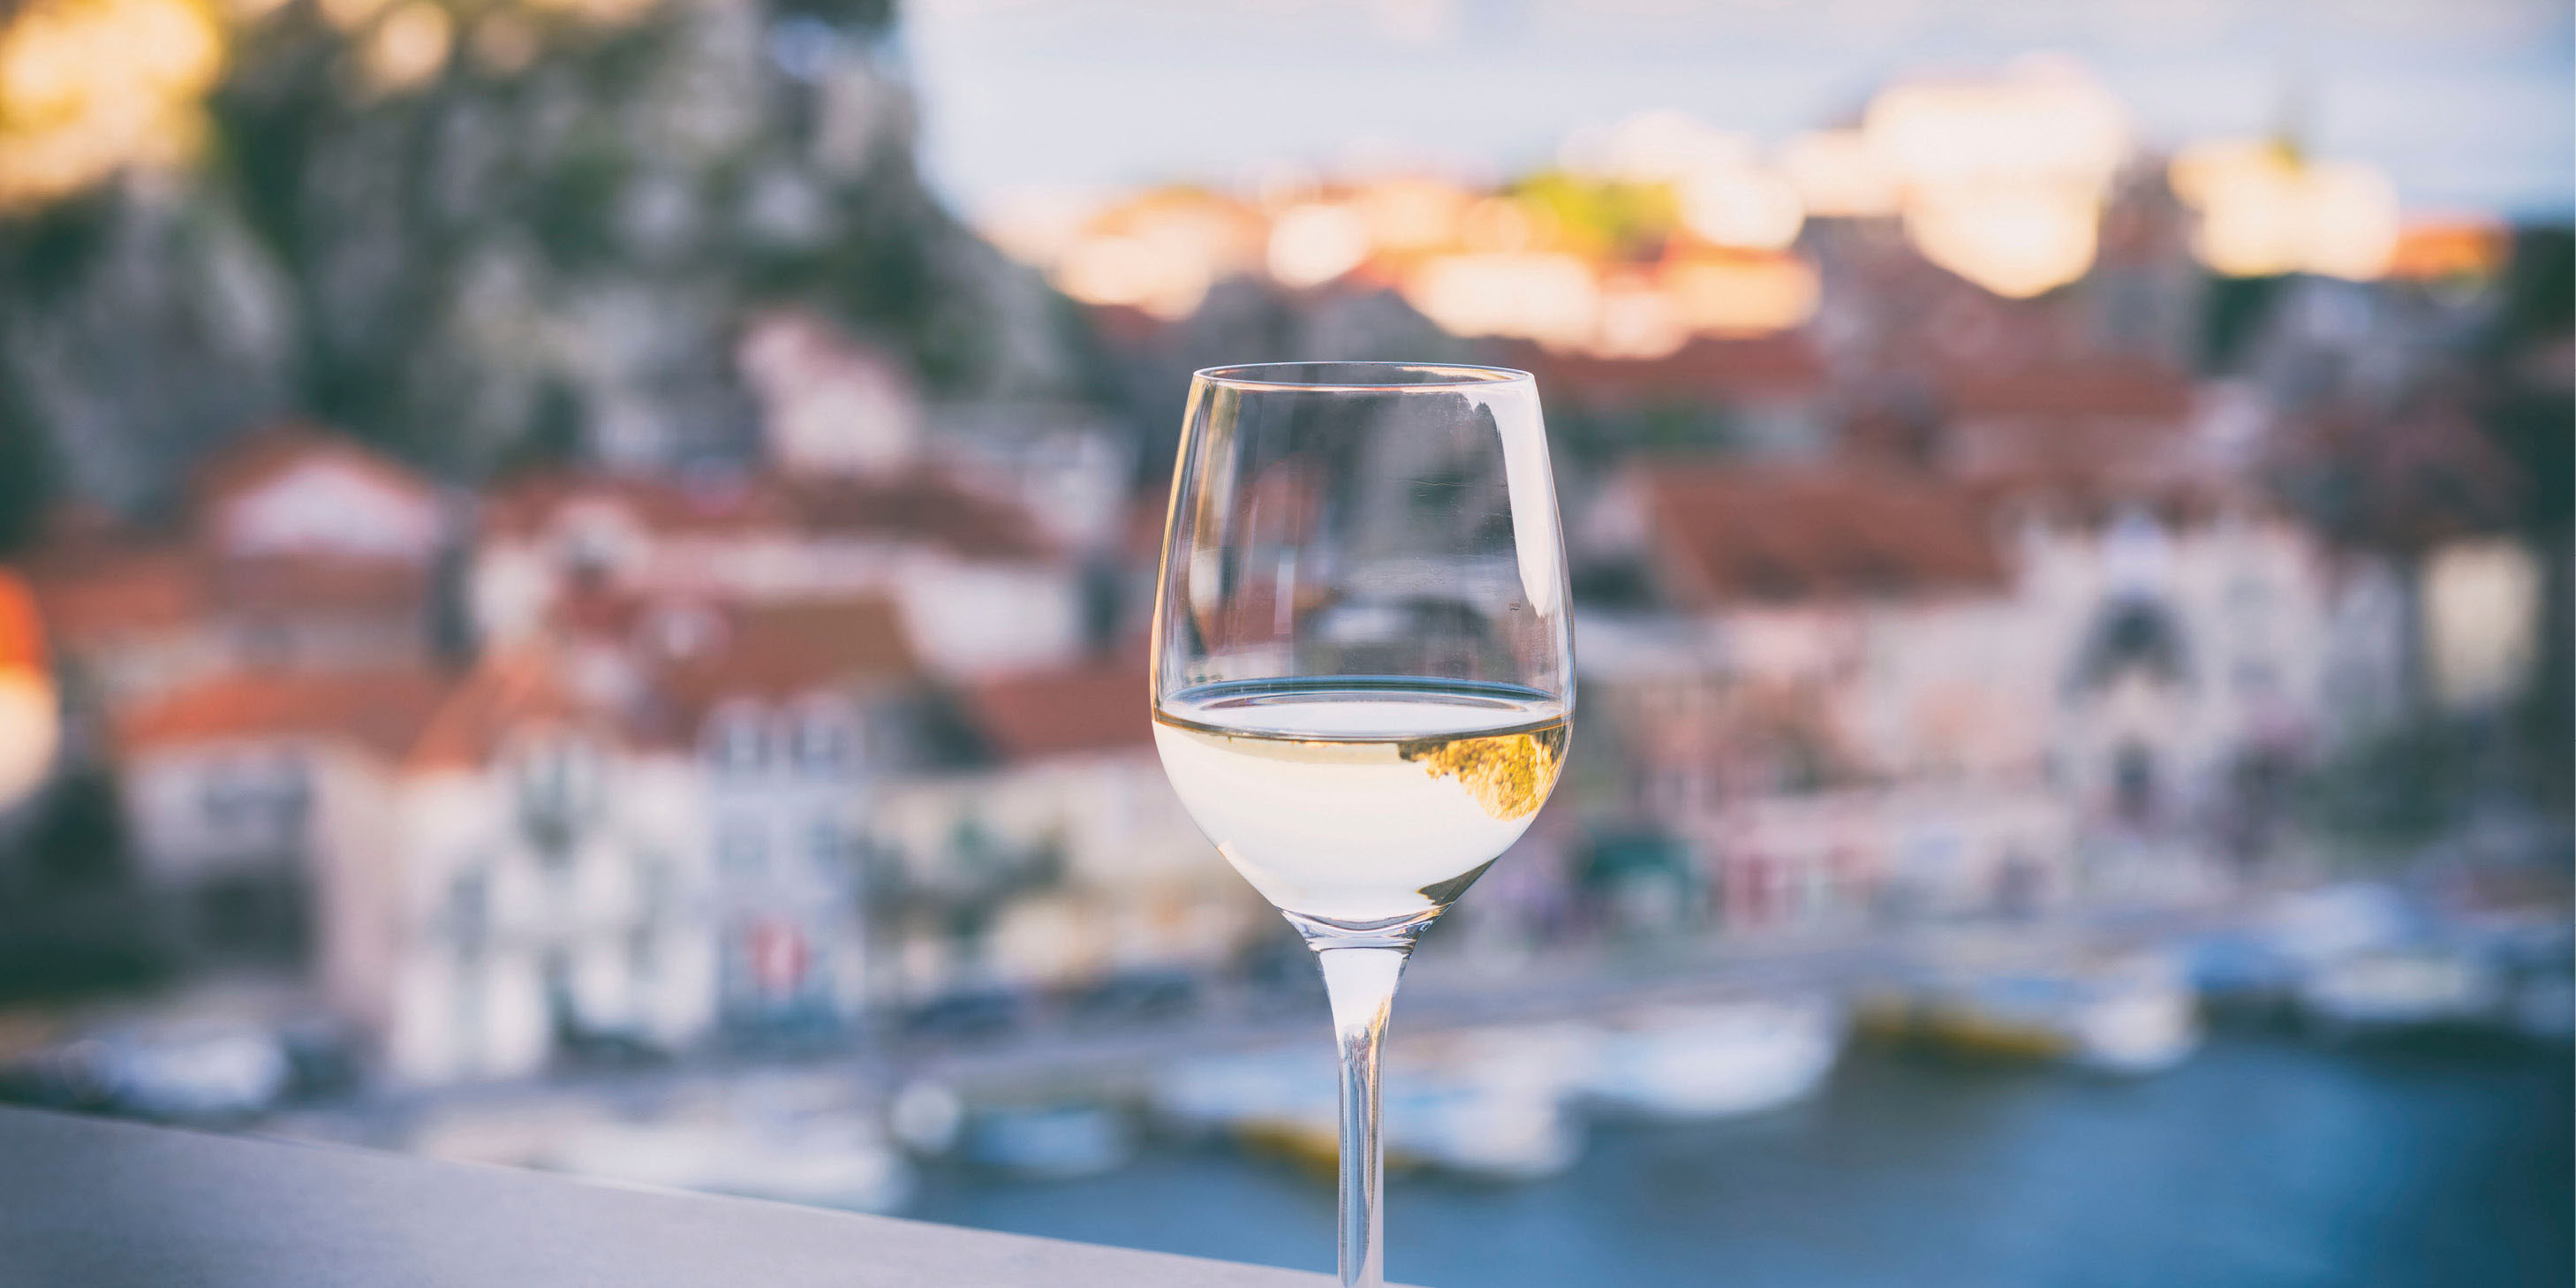 A glass of white wine in the foreground of a Mediterranean port town, which is in the shade